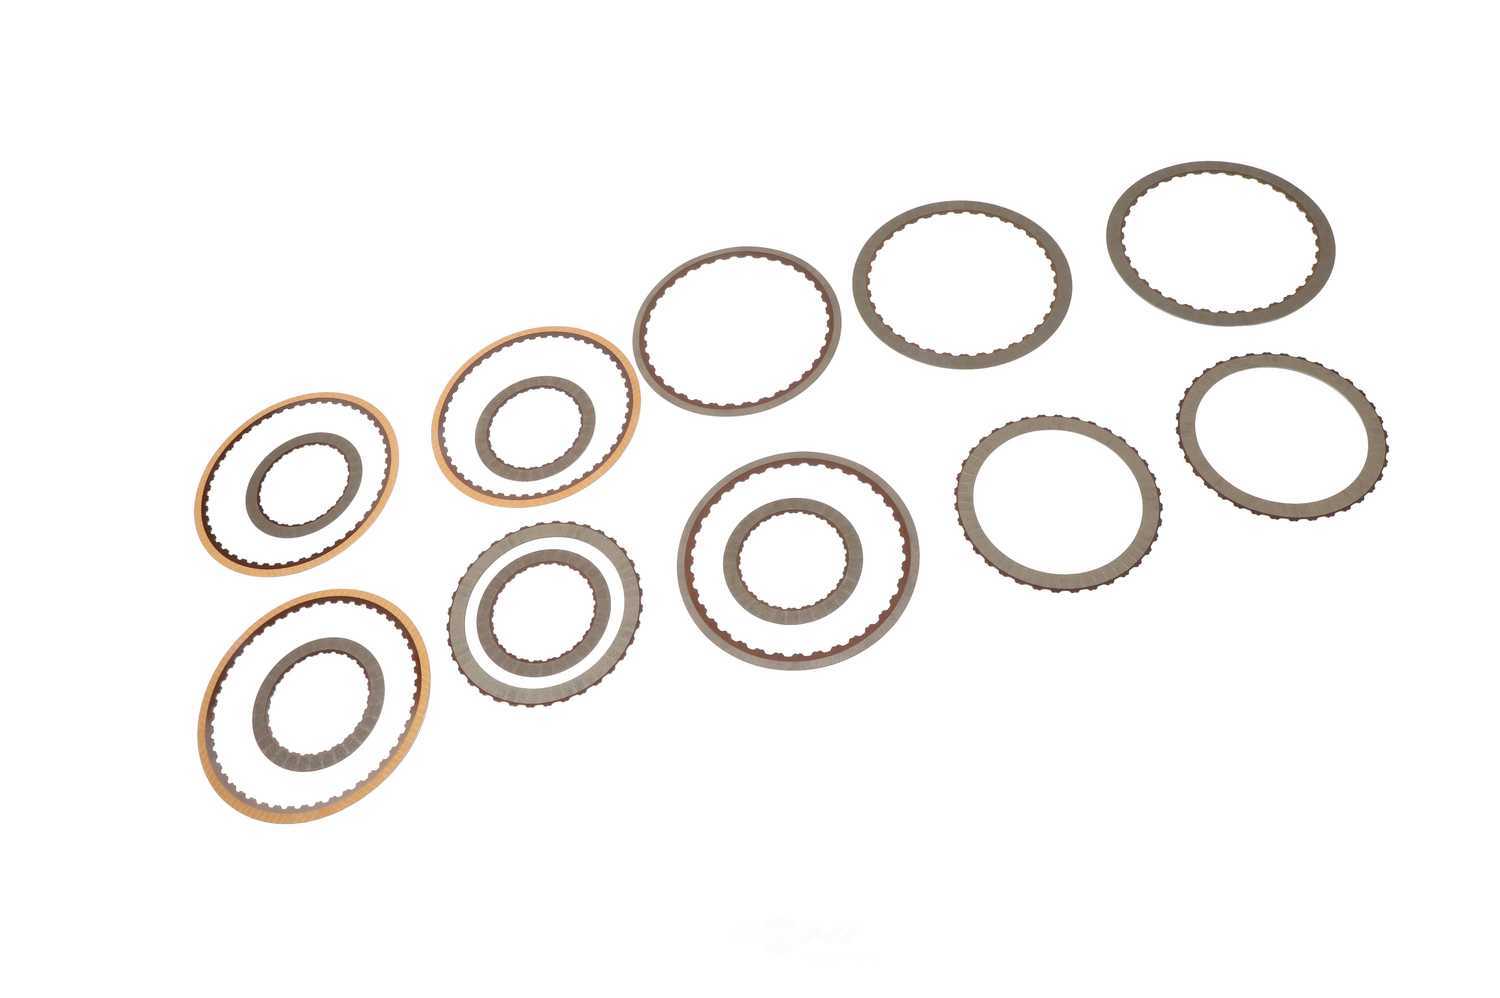 GM GENUINE PARTS CANADA - Transmission Clutch Friction Plate Kit - GMC 24273081